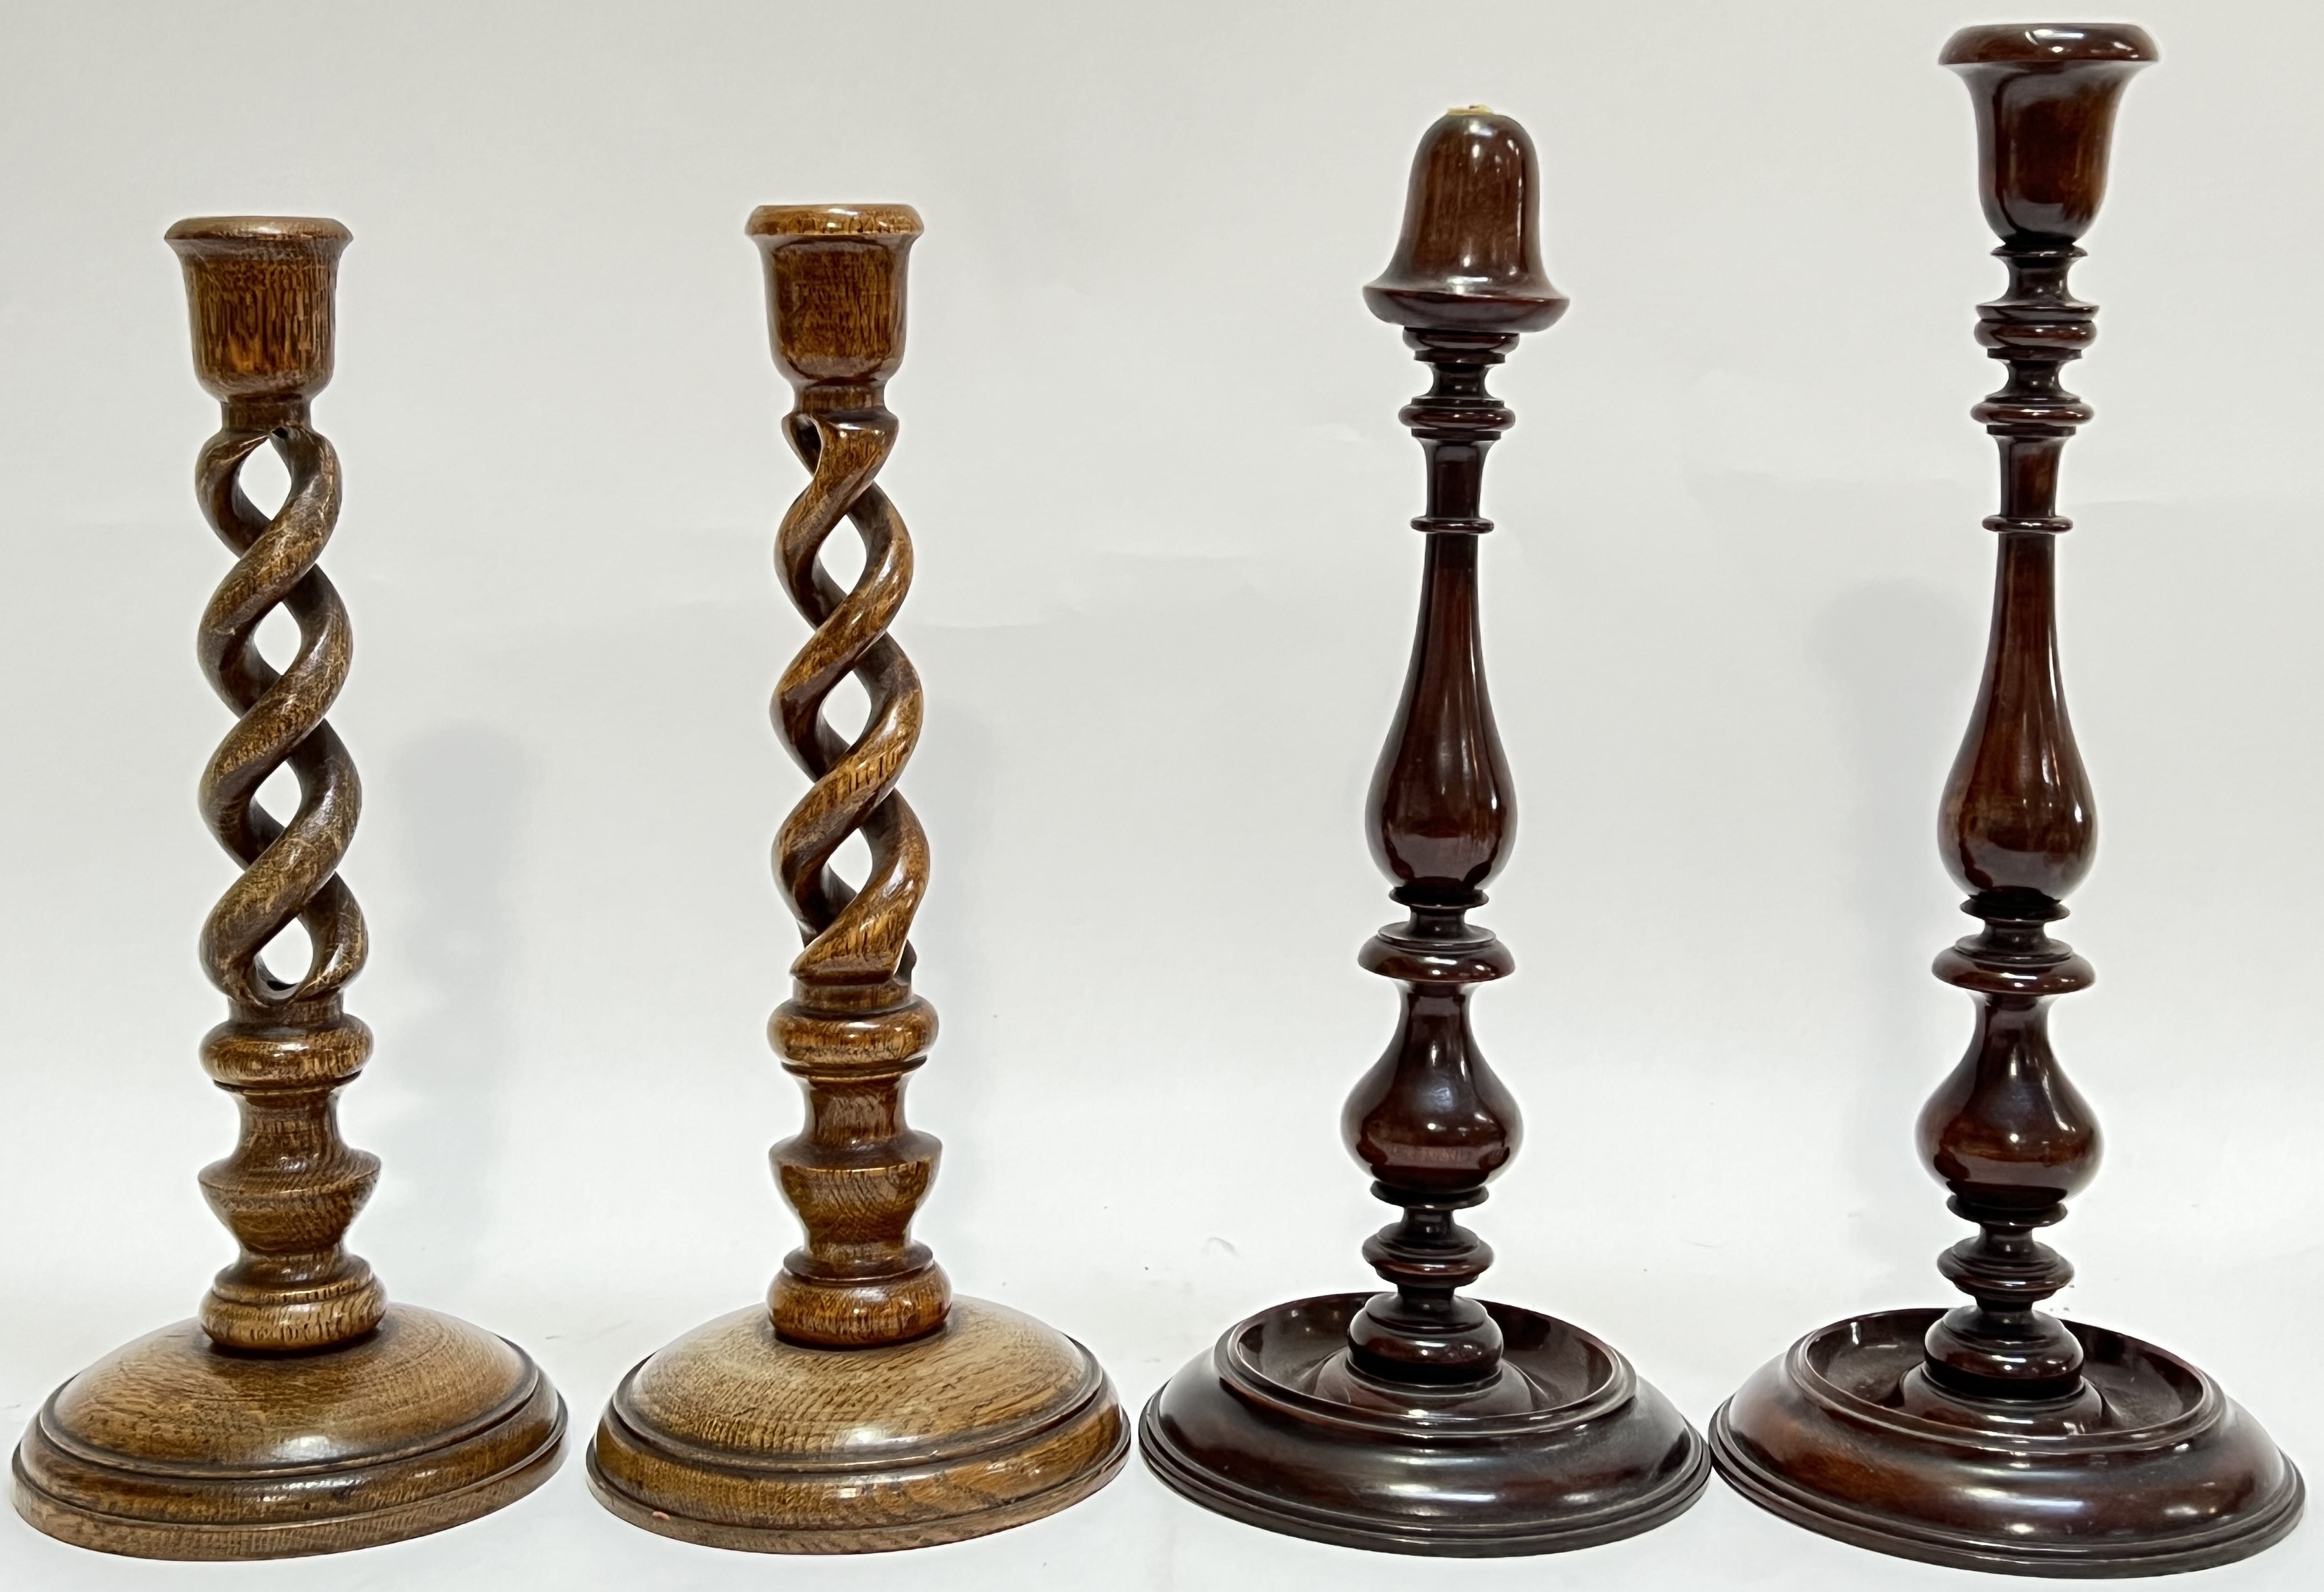 A pair of twist-stem oak candlestick holders (h- 31cm), together with a pair of mahogany candlestick